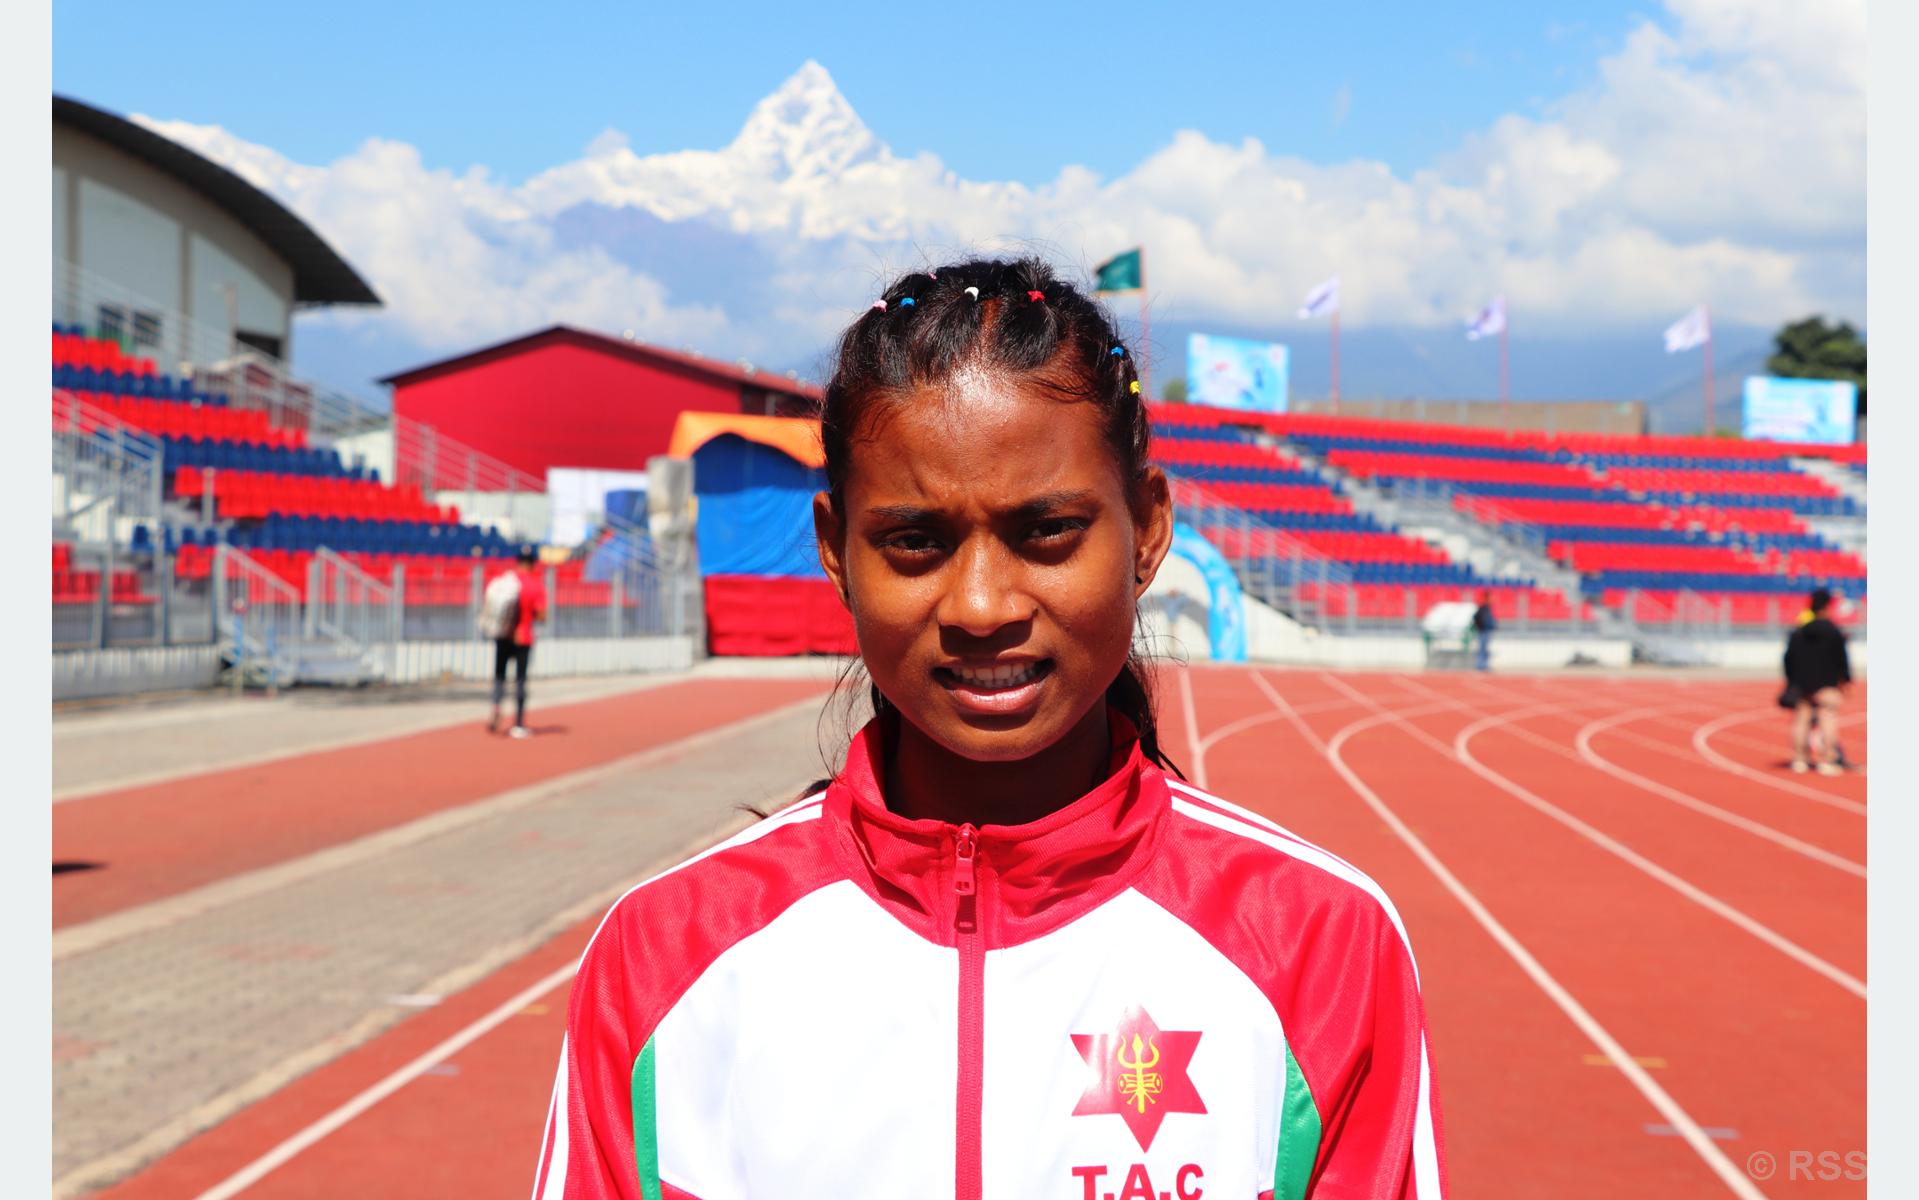 After winning gold in Ninth National Games, Tharu aims for gold in international athletics